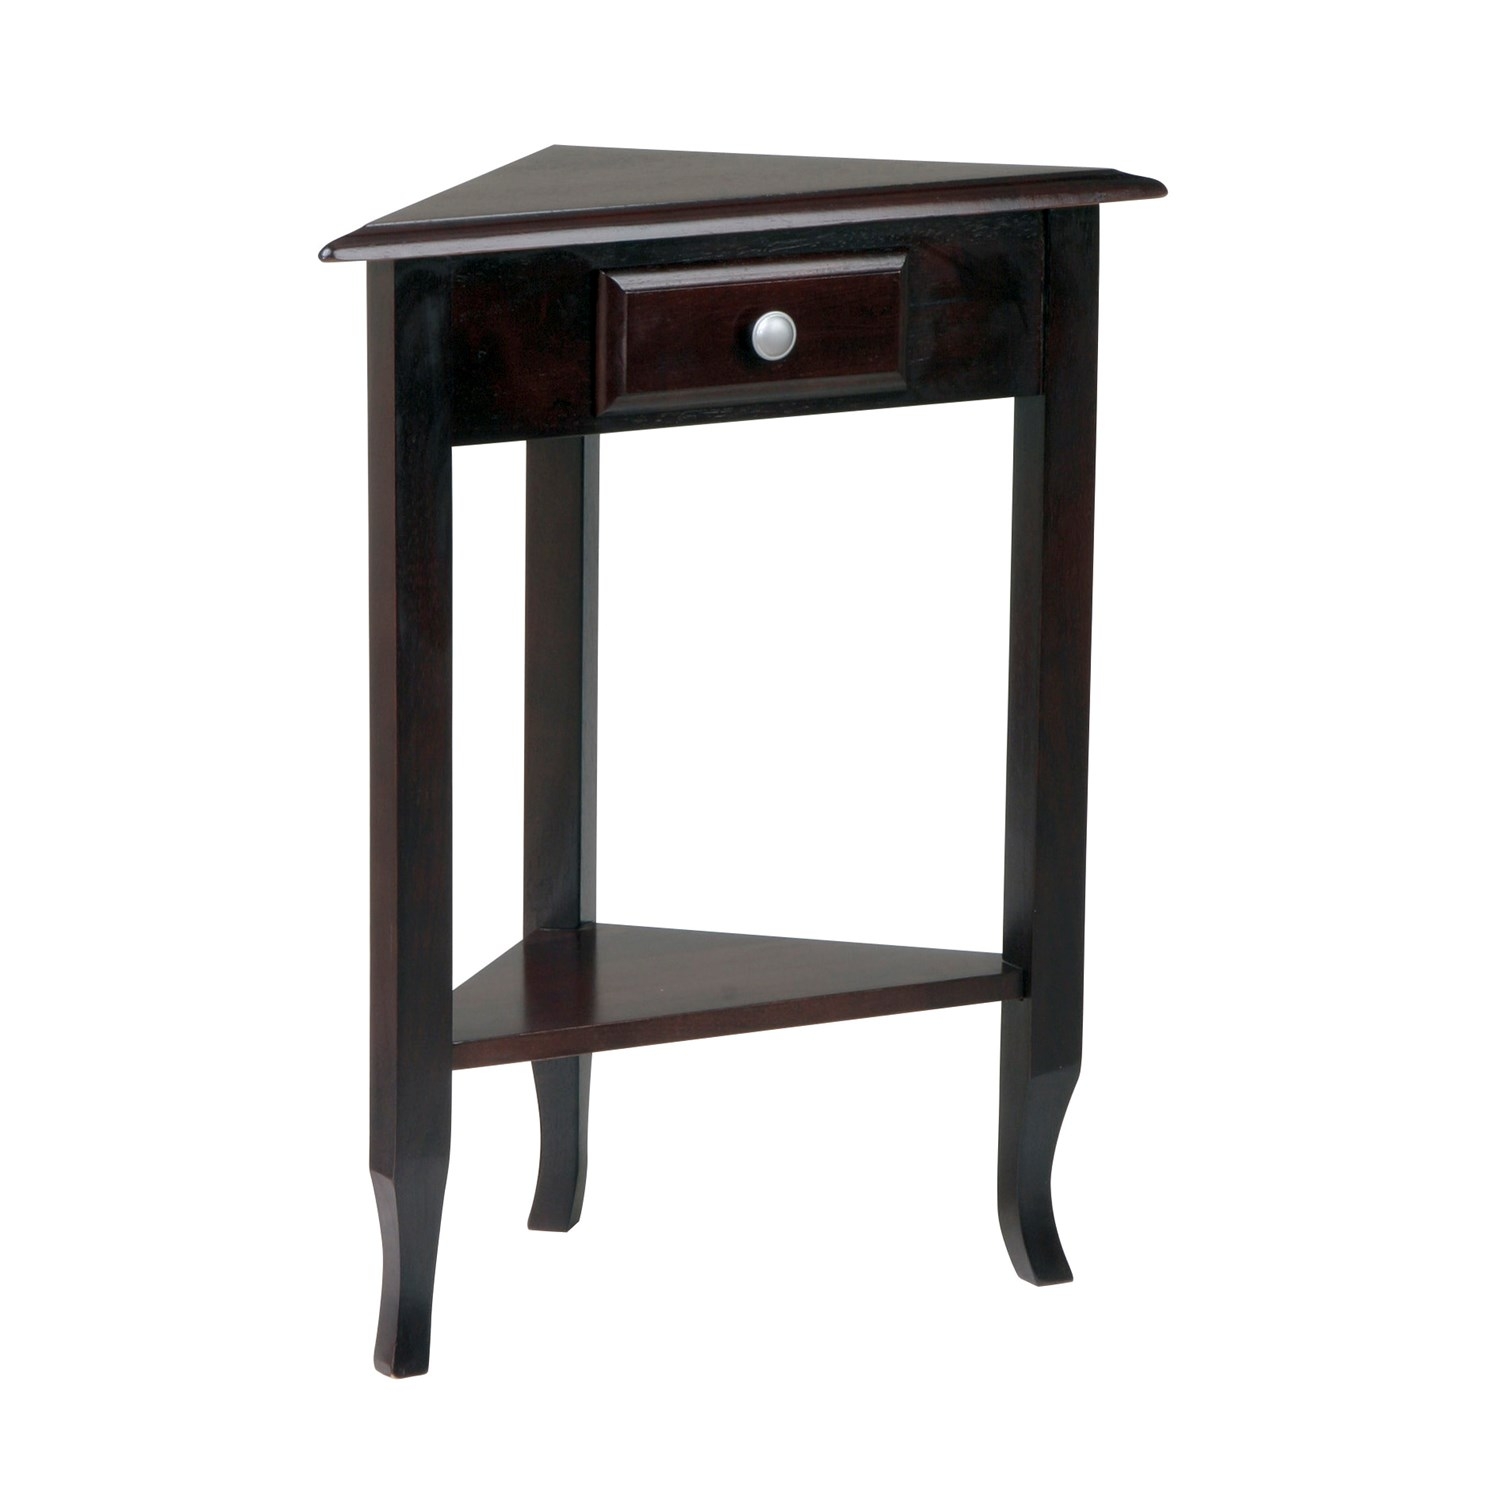 Home star products richmond corner telephone accent table